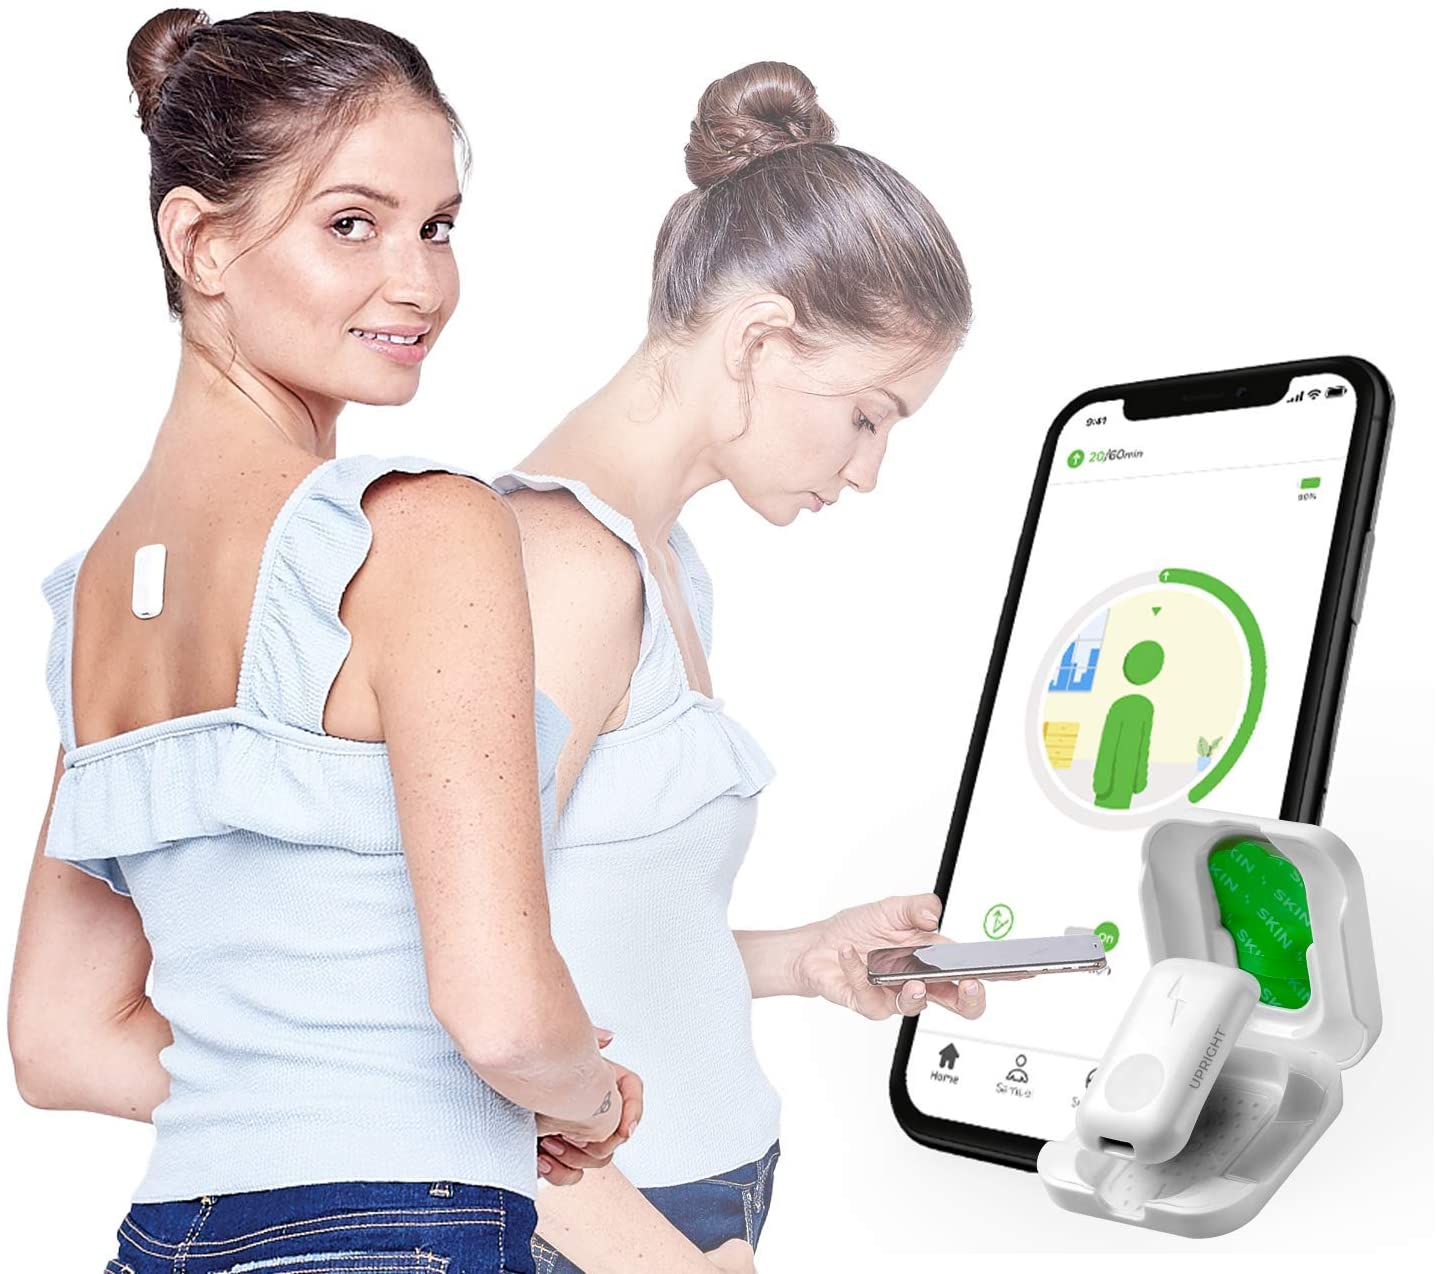 Upright - Back Posture Monitor and Trainer on Lightning Deal $59.99